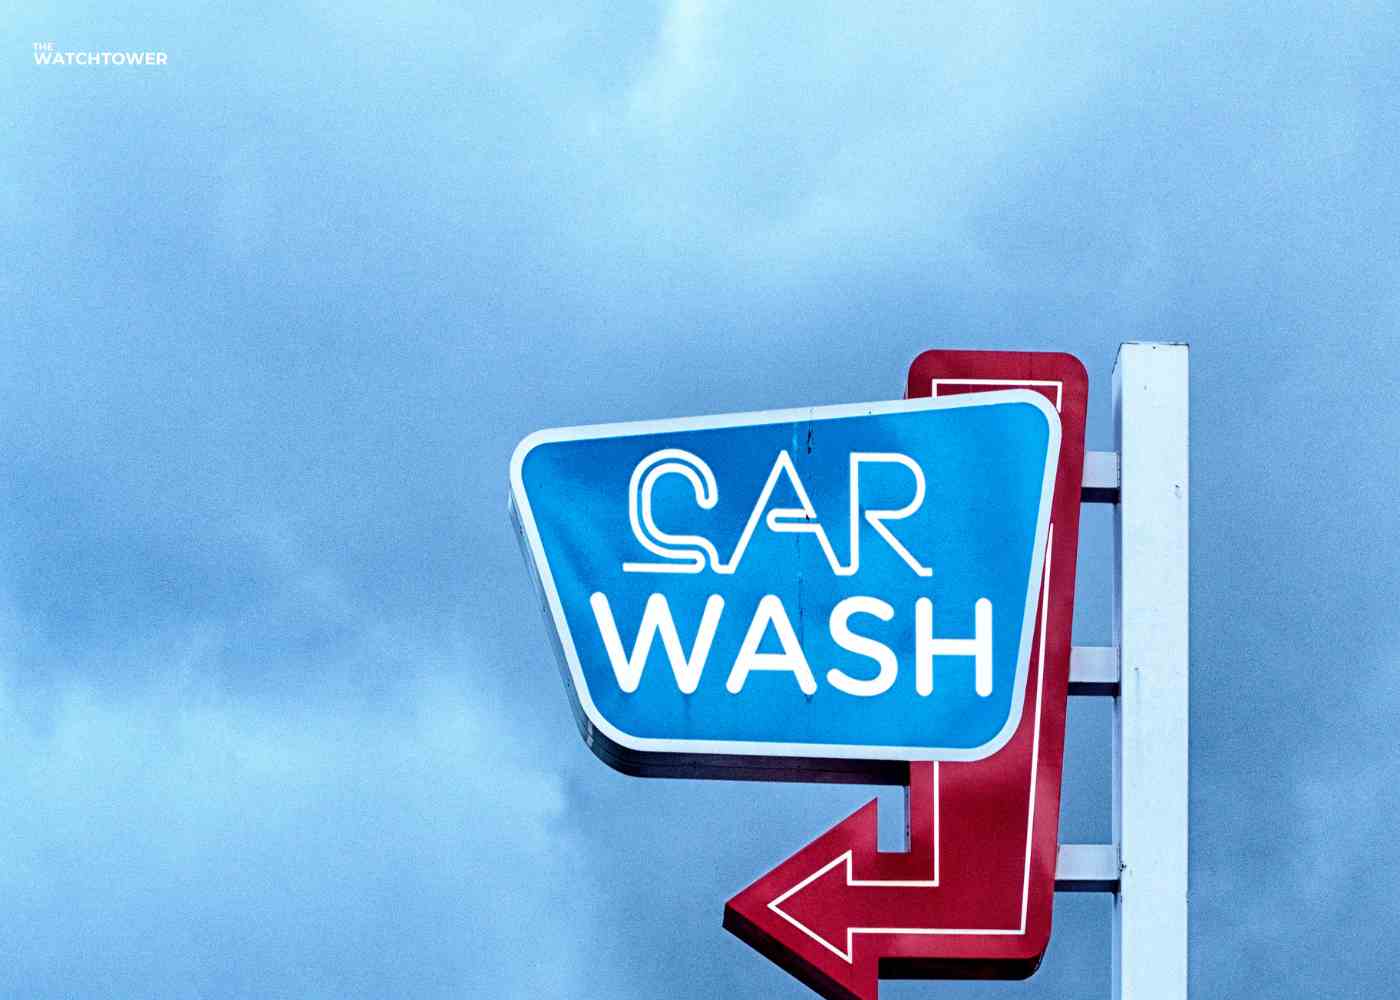 Step Up Your Charity Car Wash Aesthetic with These 8 Banner Printing Tips!